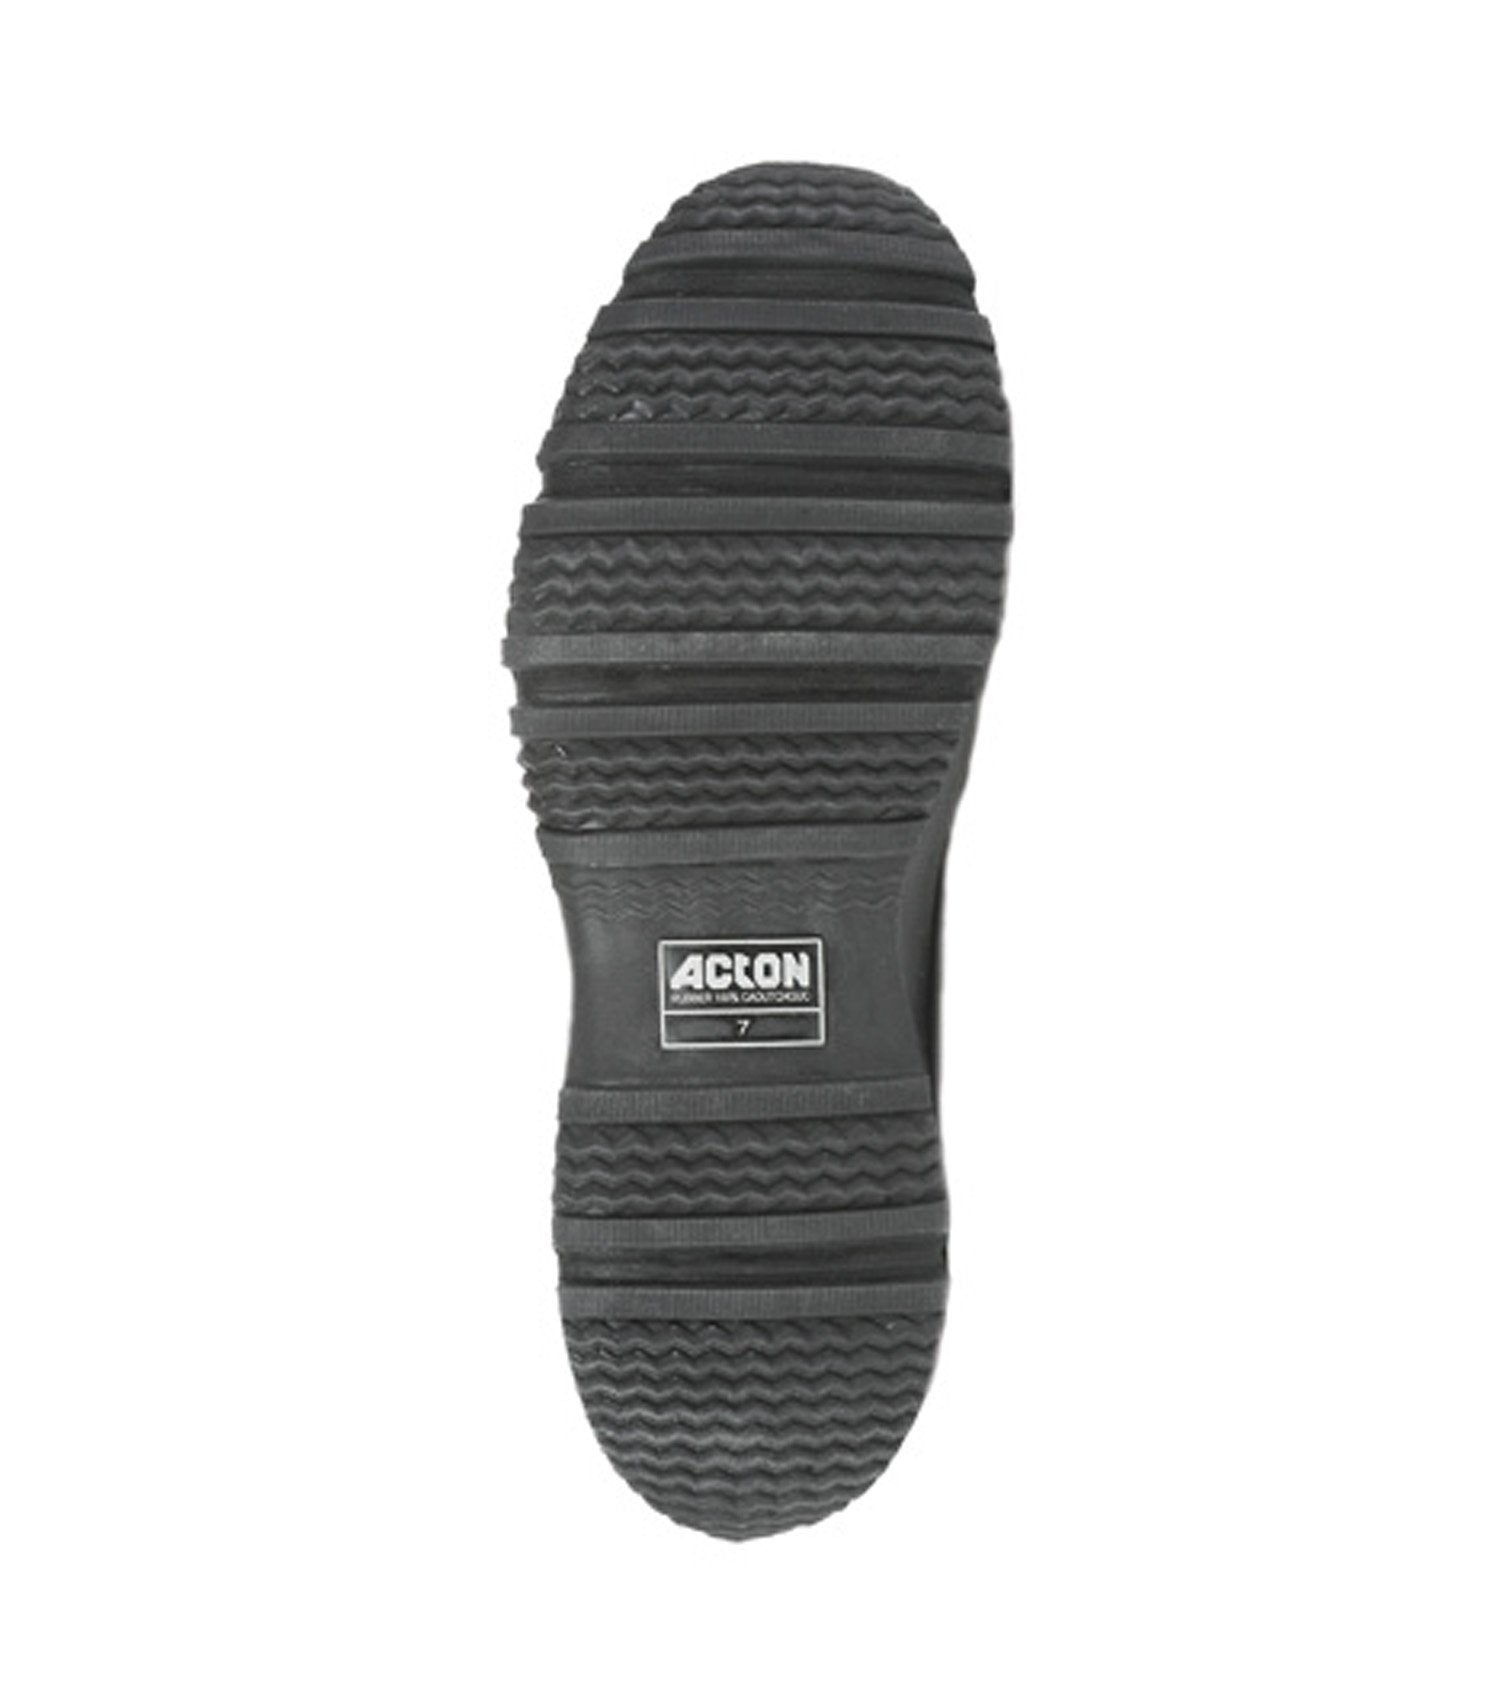 Acton Robson Work Overshoes | Extra Wide Fit | Black | Sizes 7 - 17 Work Boots - Cleanflow